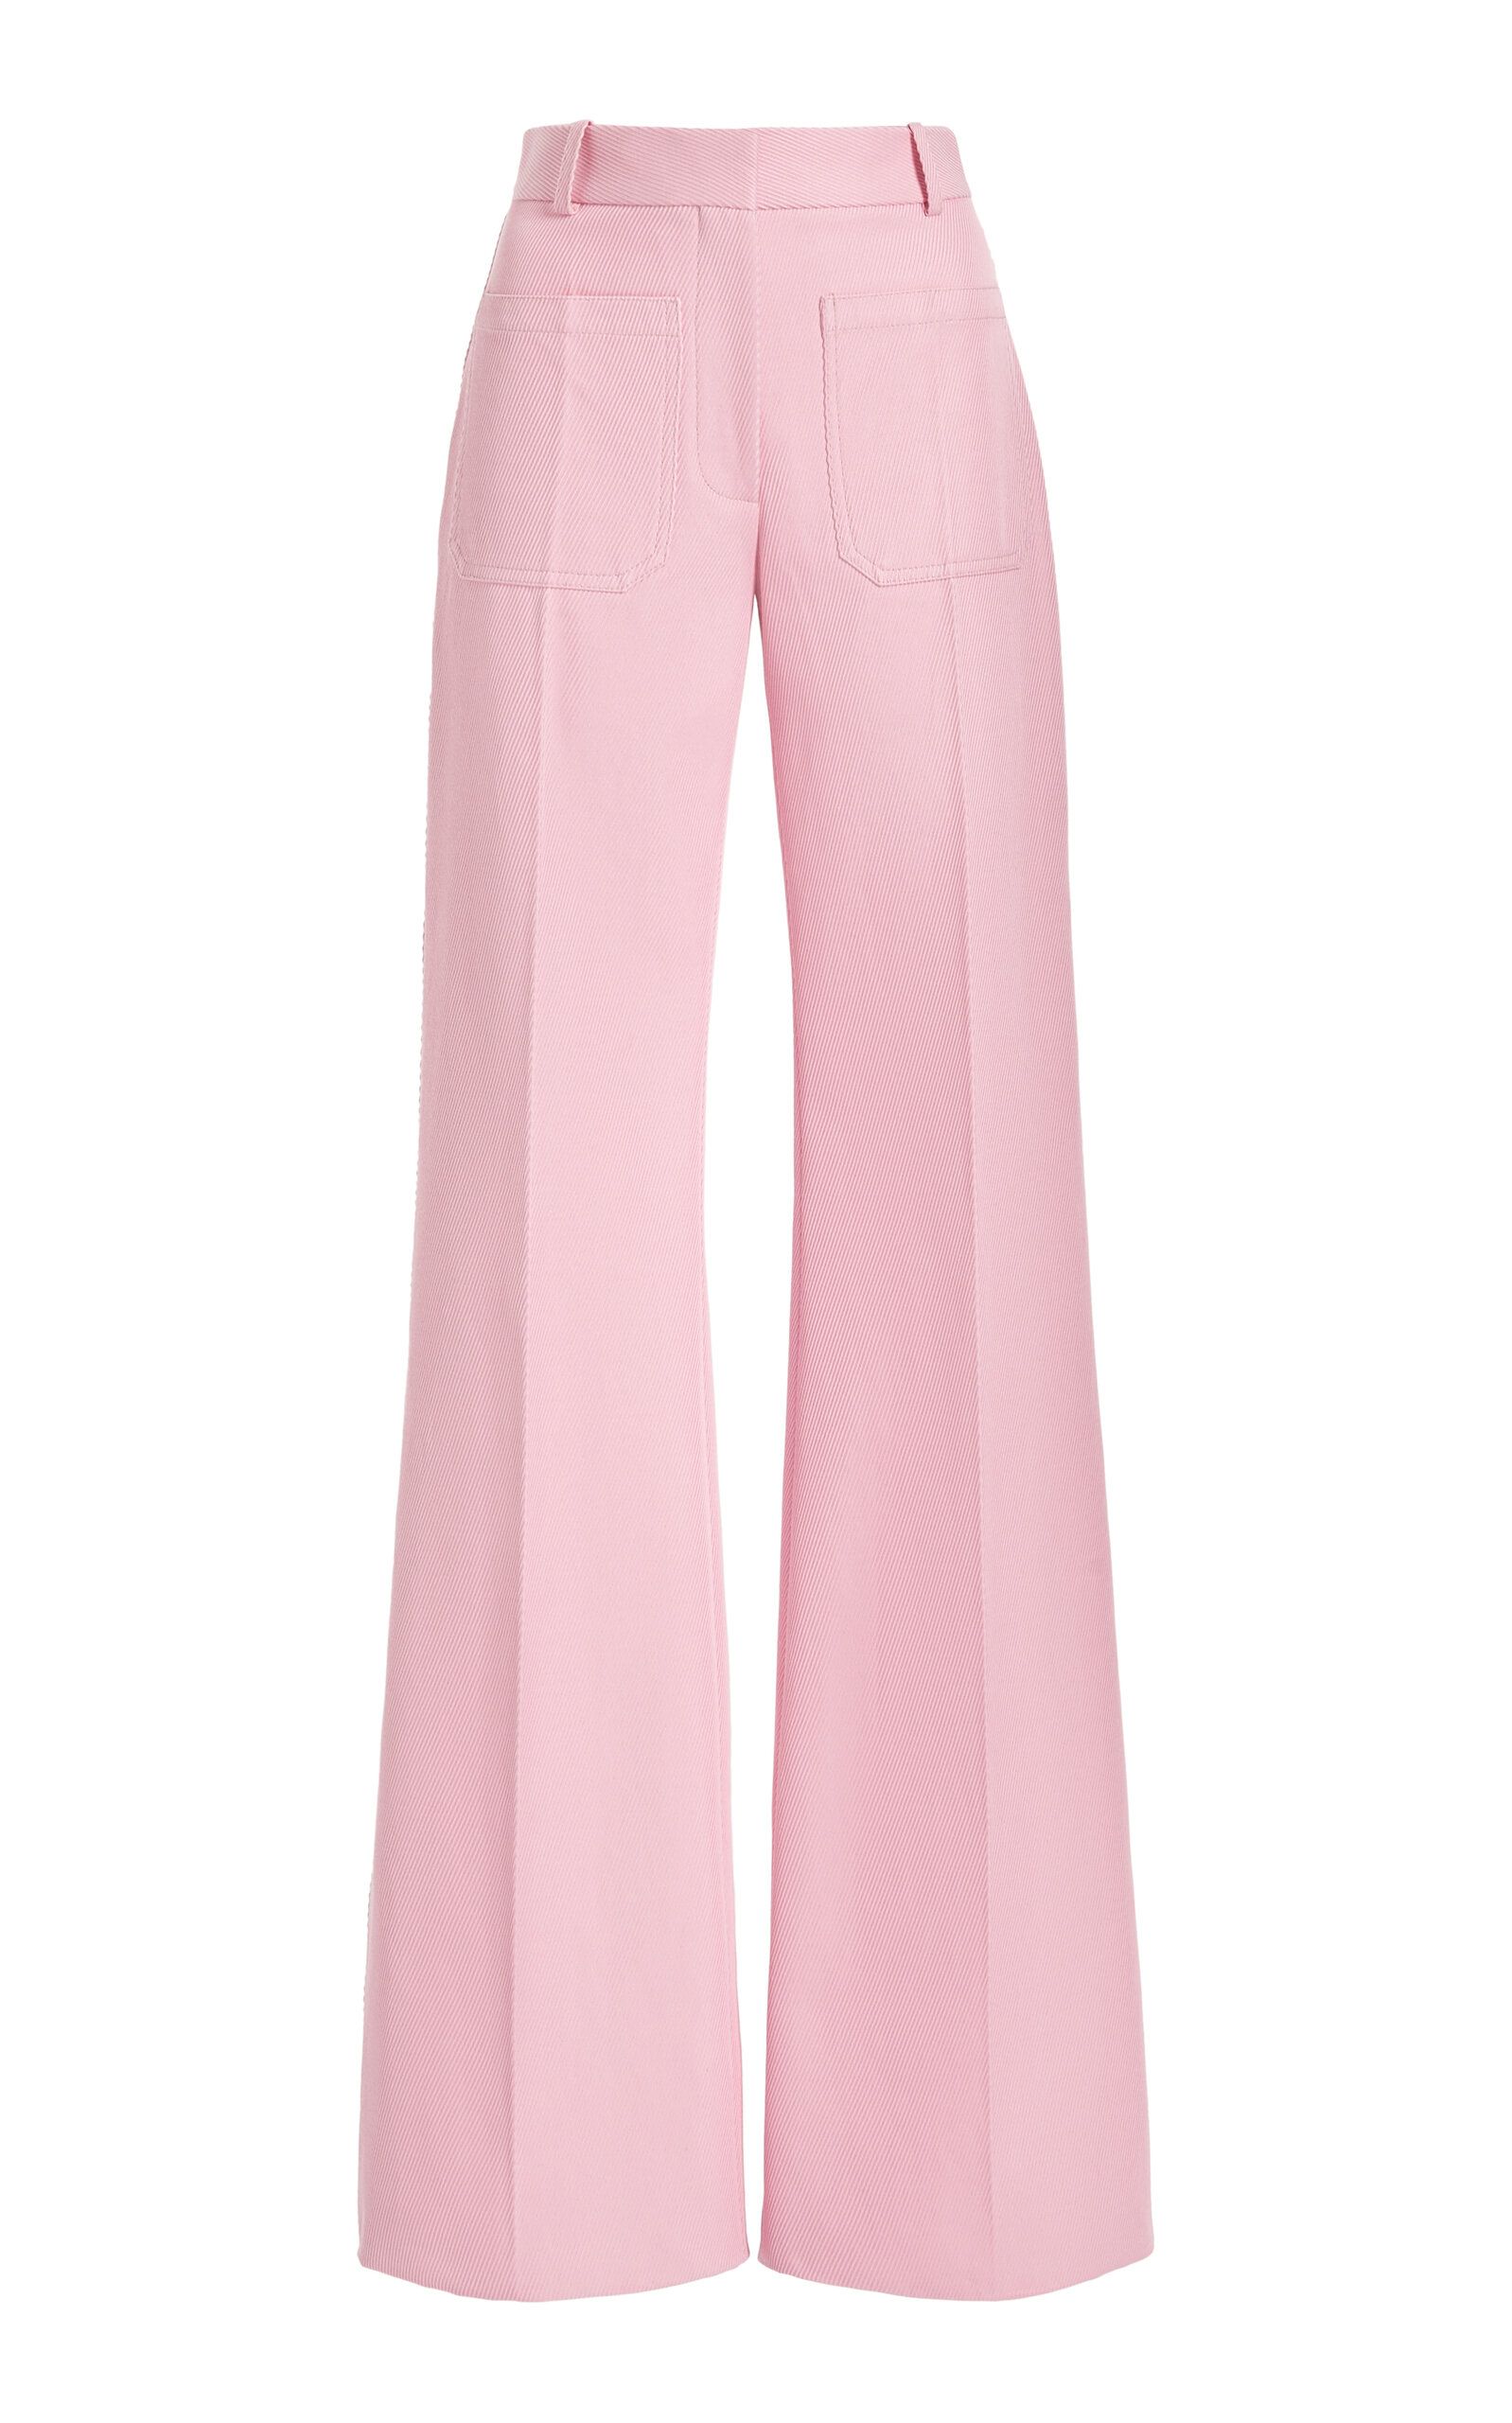 Bold and Beautiful: Pink Trousers for Standout Style